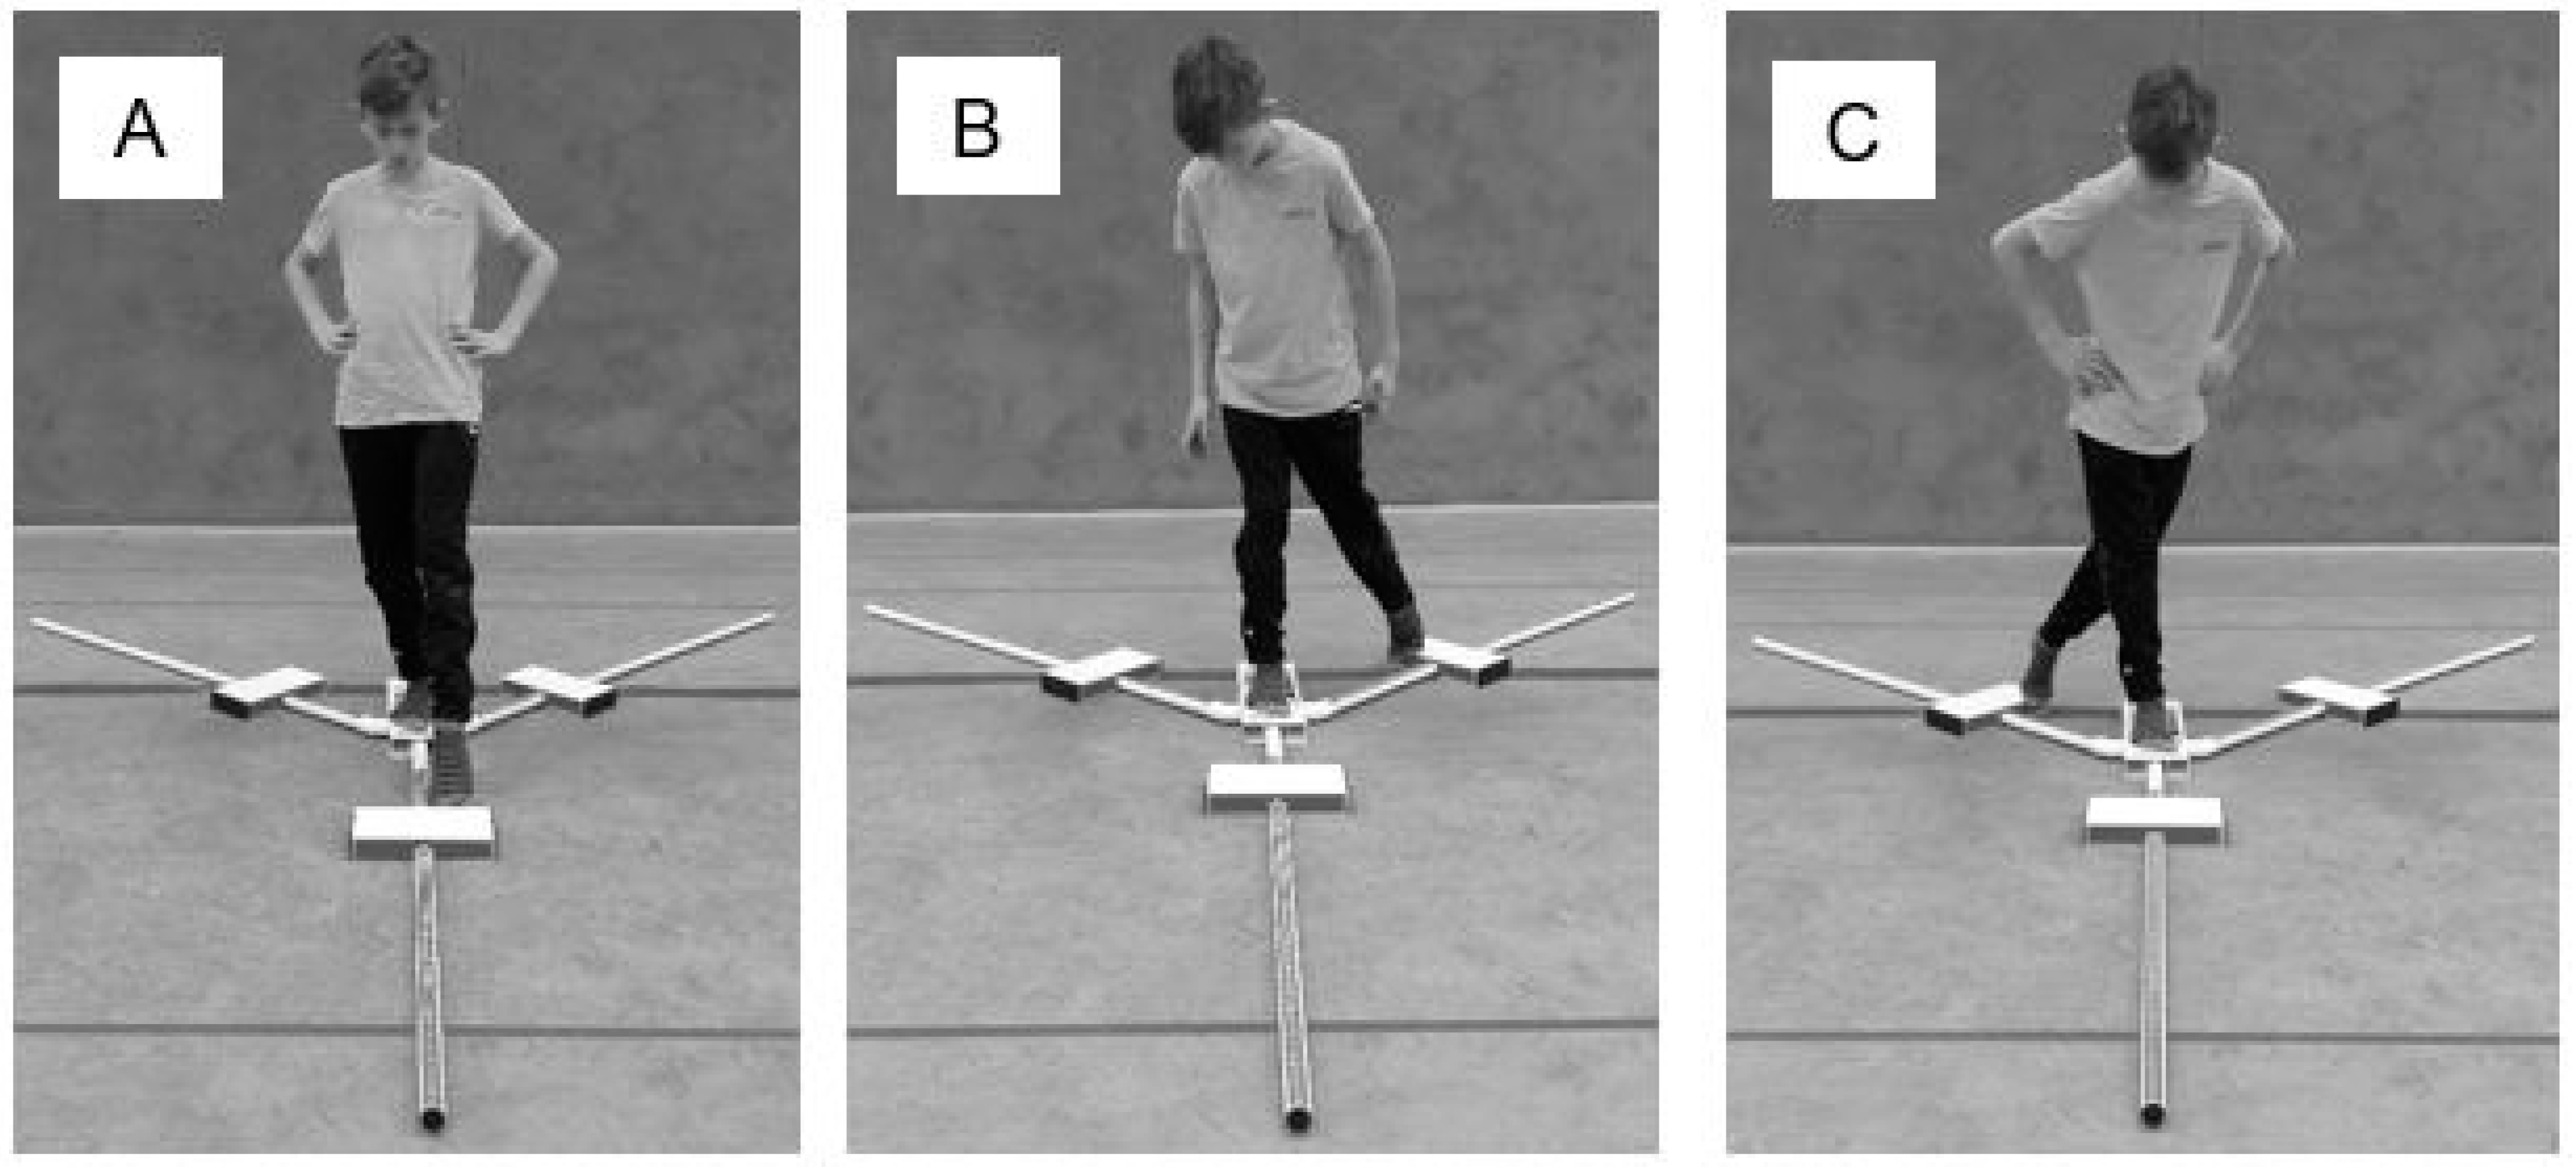 Children | Free Full-Text | Comparison of Lower and Upper Quarter Y Balance  Test Performance in Adolescent Students with Borderline Intellectual  Functioning Compared to Age- and Sex-Matched Controls